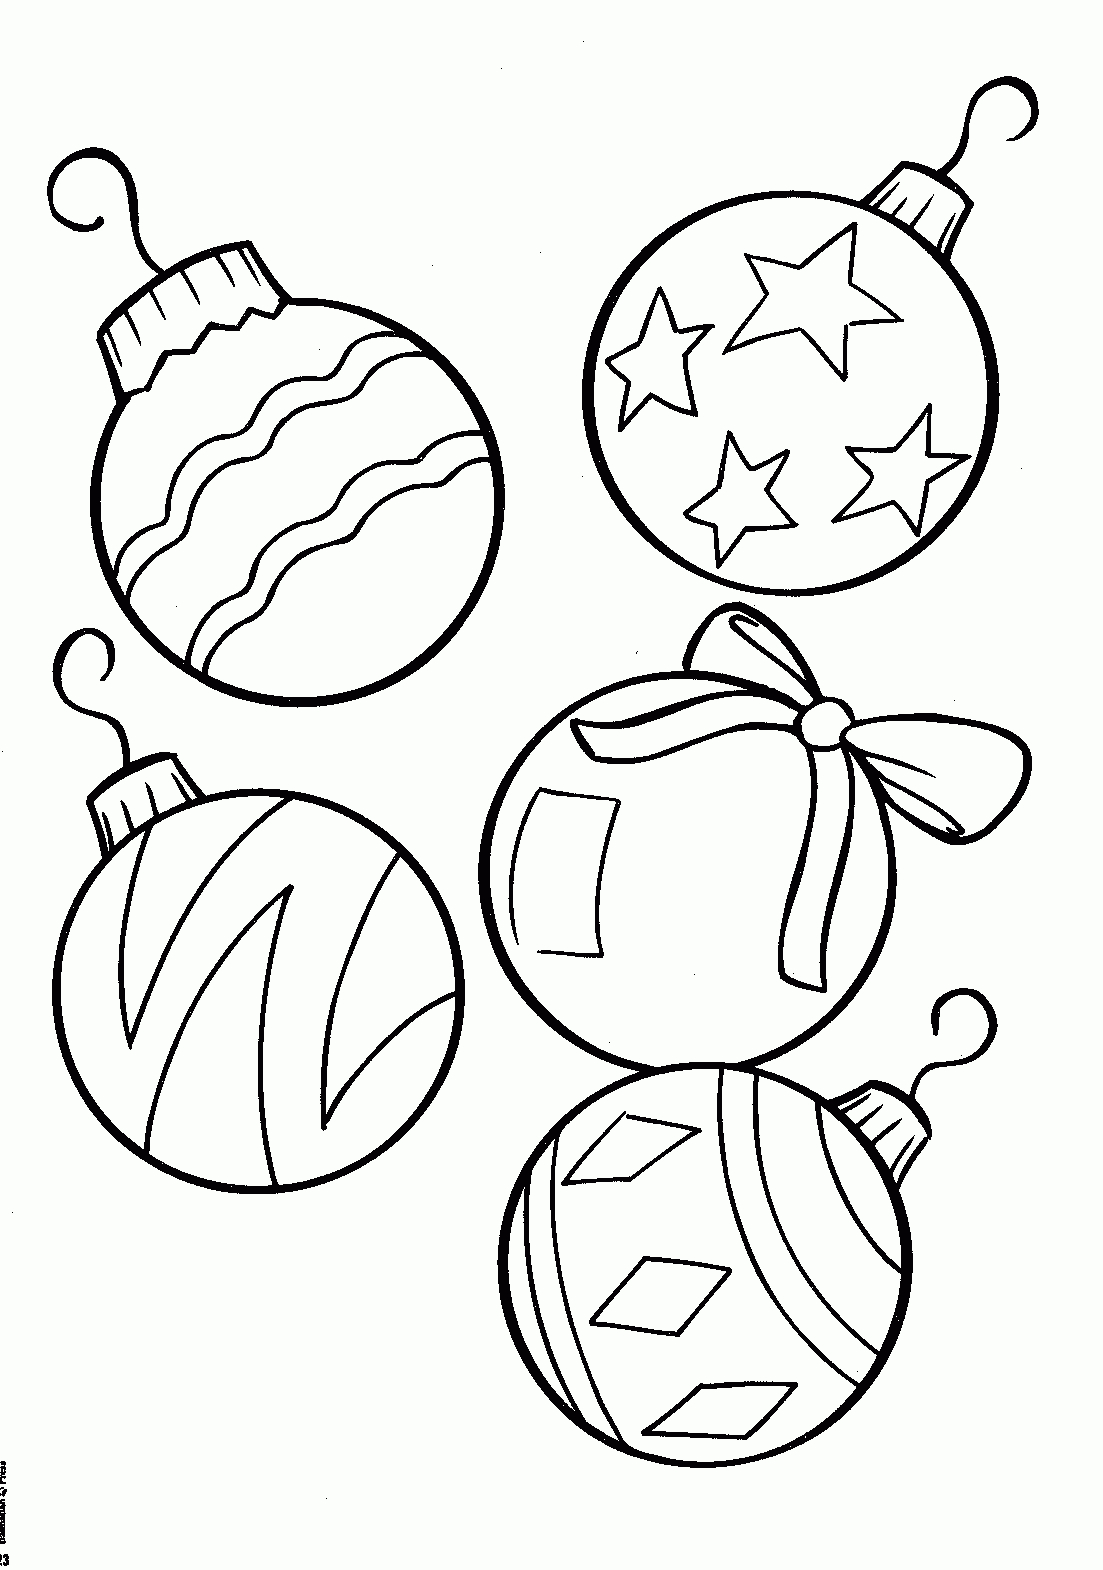 Ball Ornaments - Christmas Coloring Pages - Free Large Images - Xmas Coloring Pages Free Printable